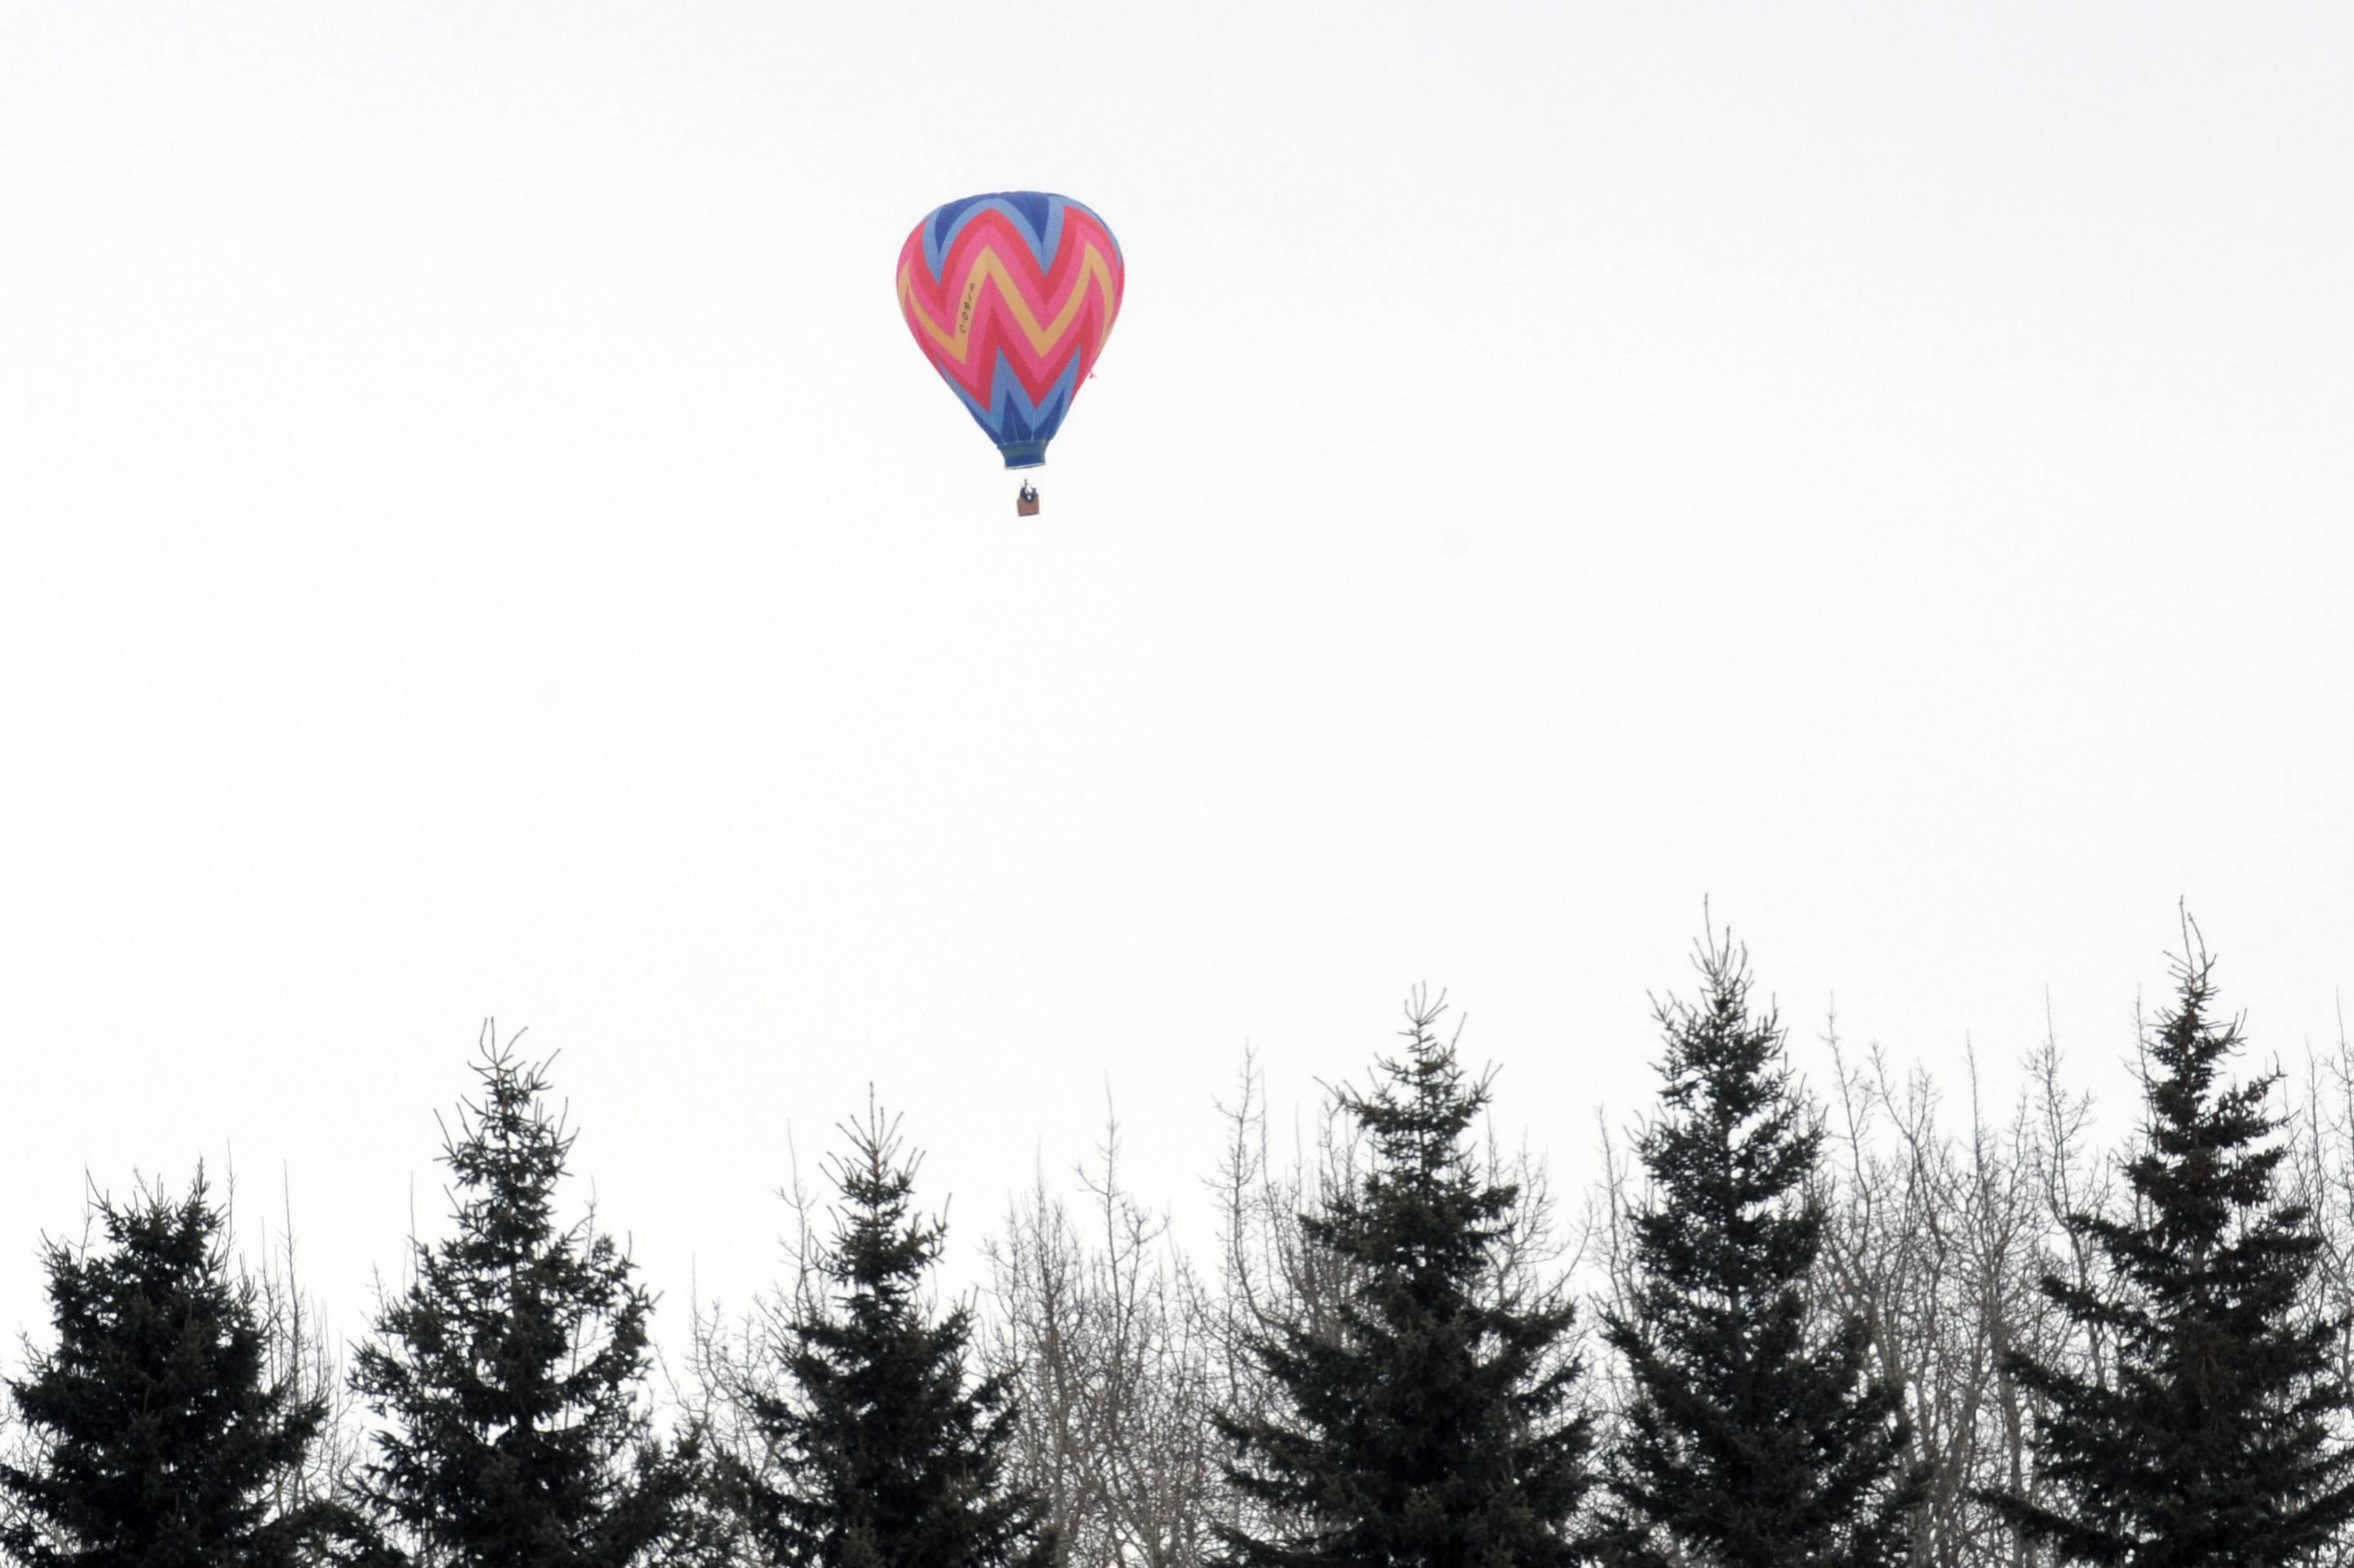 SLOWLY- Hot air balloons filled the sky just west of the City recently as they floated one by one.